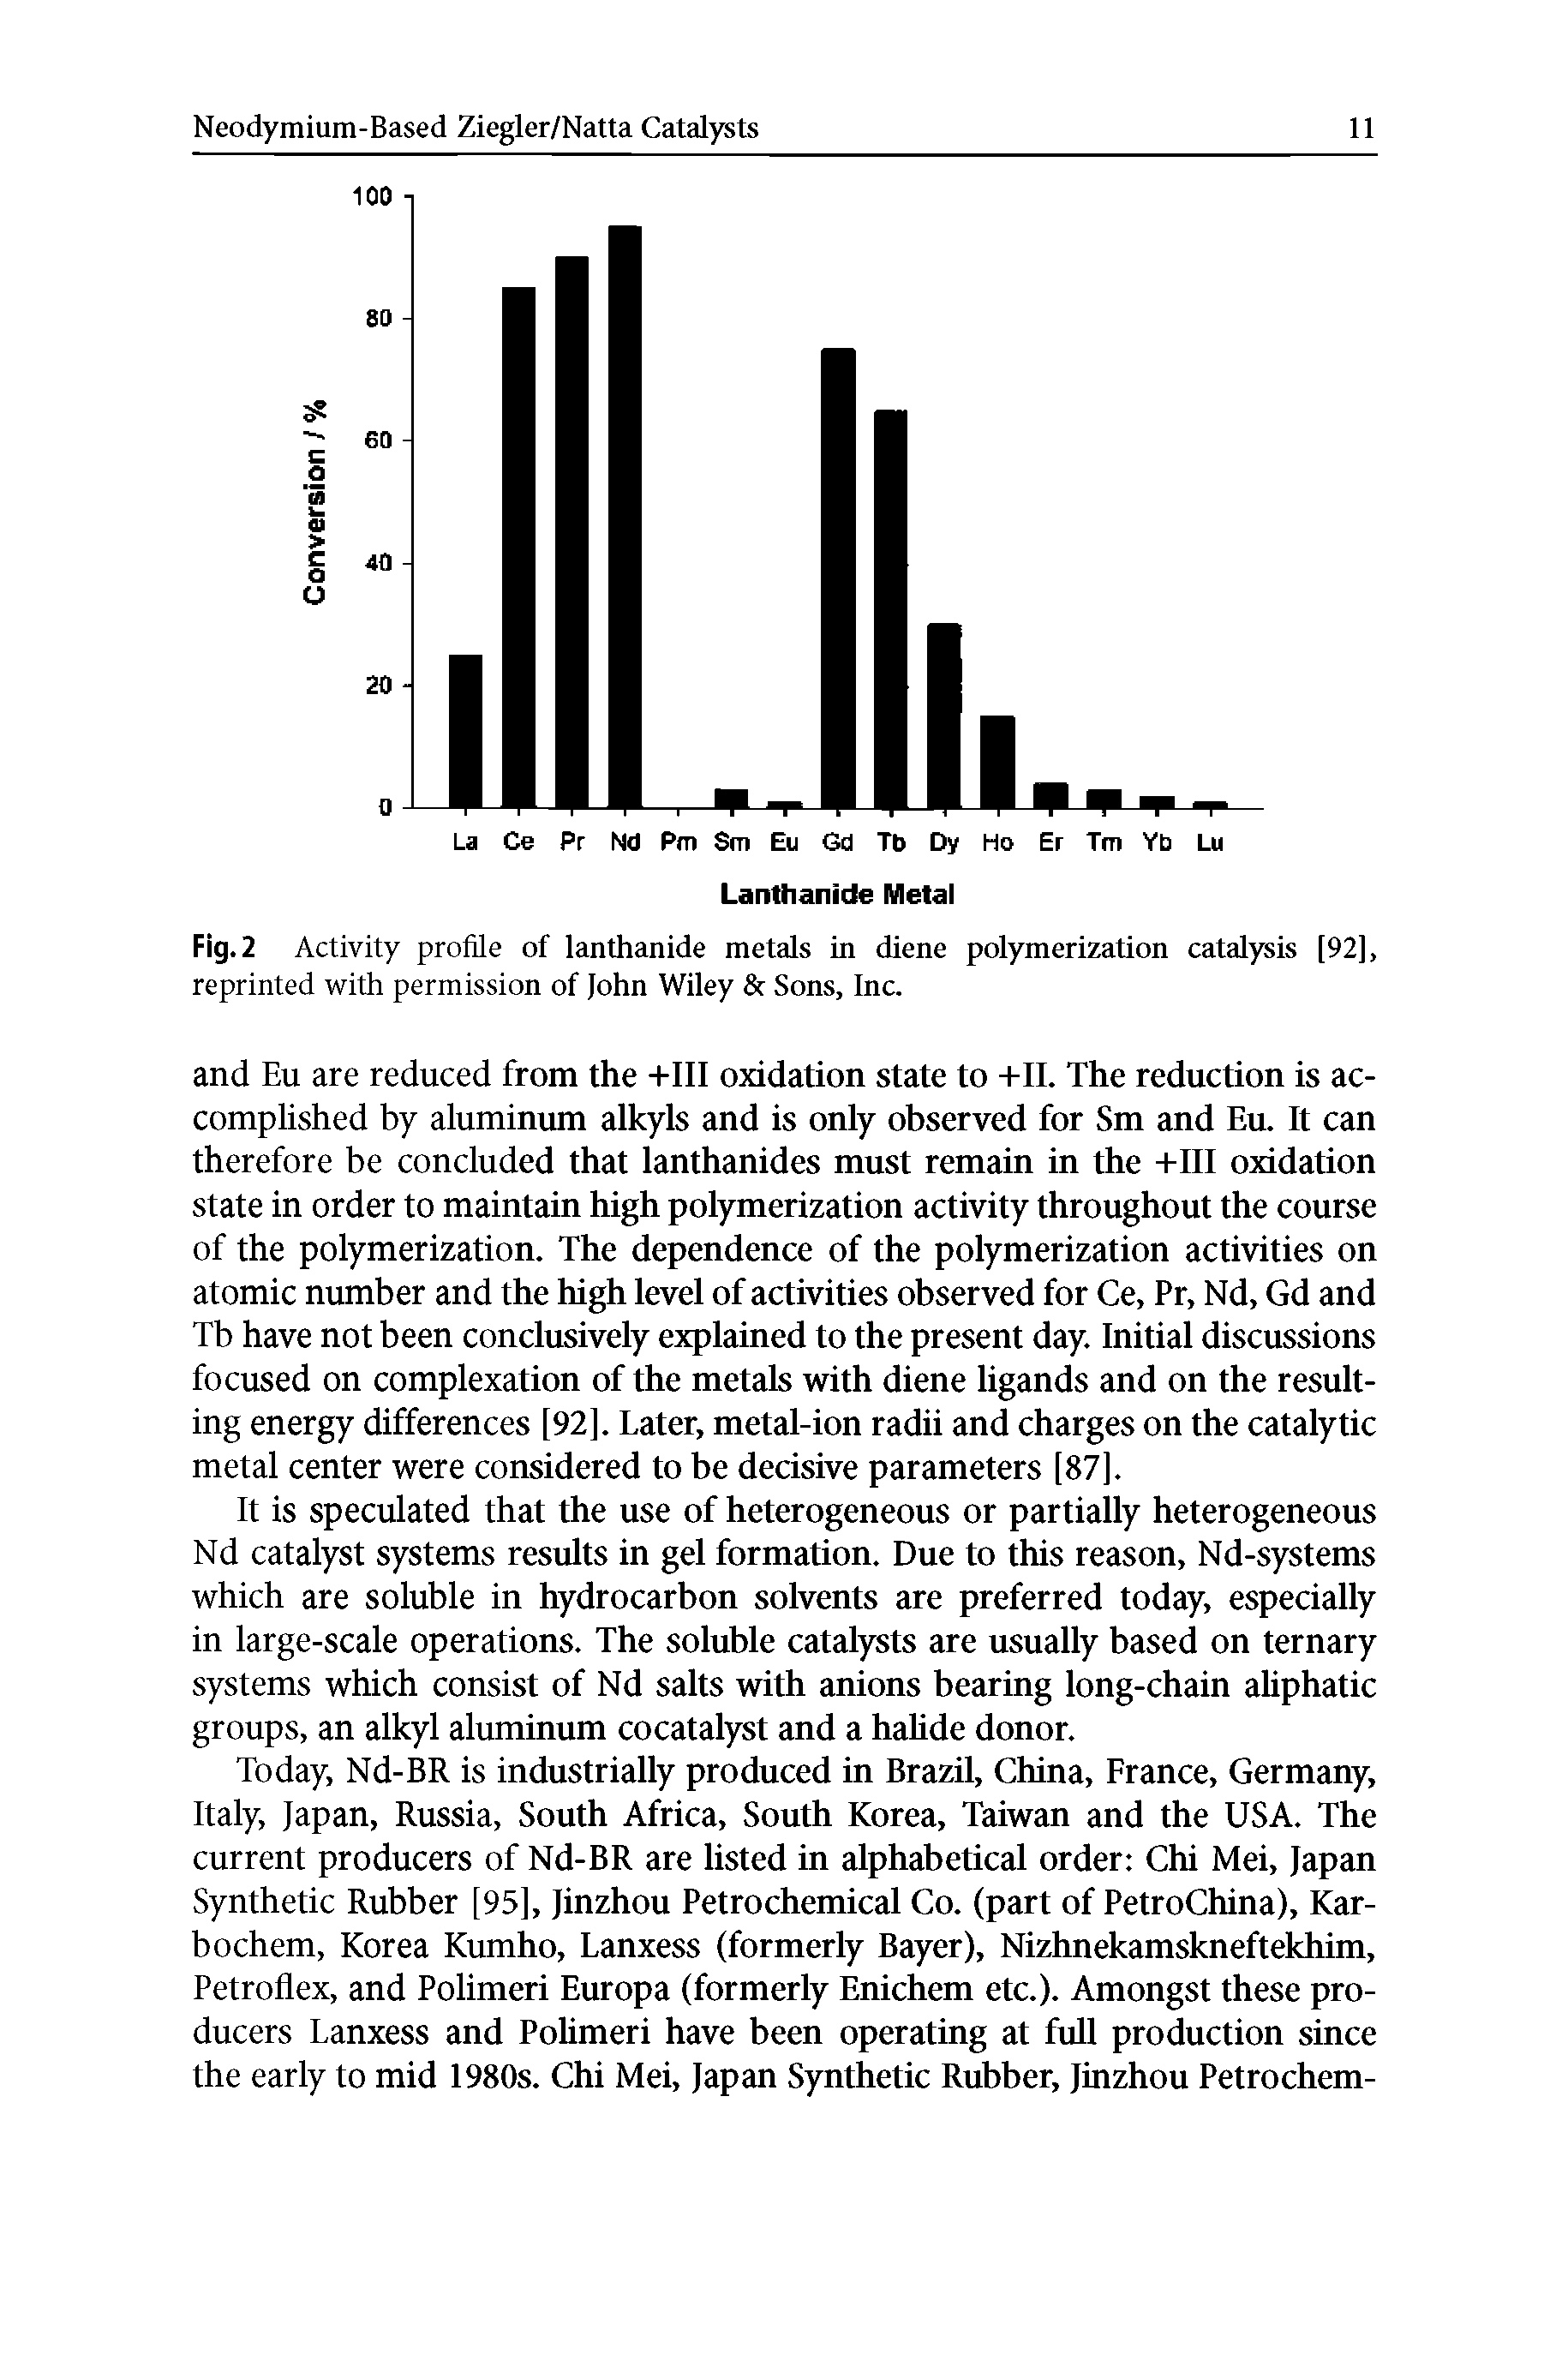 Fig. 2 Activity profile of lanthanide metals in diene polymerization catalysis [92], reprinted with permission of John Wiley Sons, Inc.